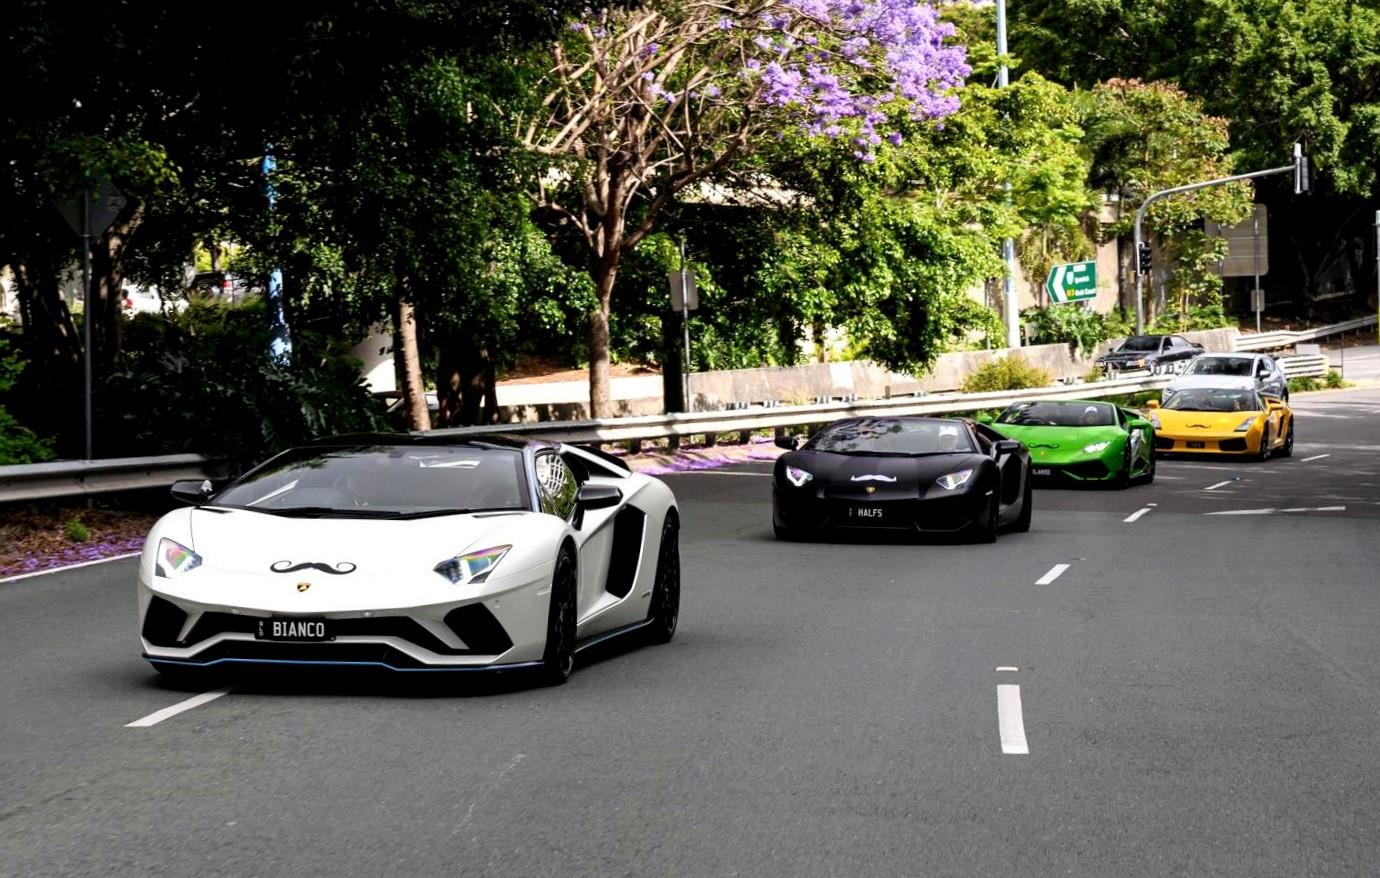 A group of Lamborghinis out on a "Bull Run" in support of Movember